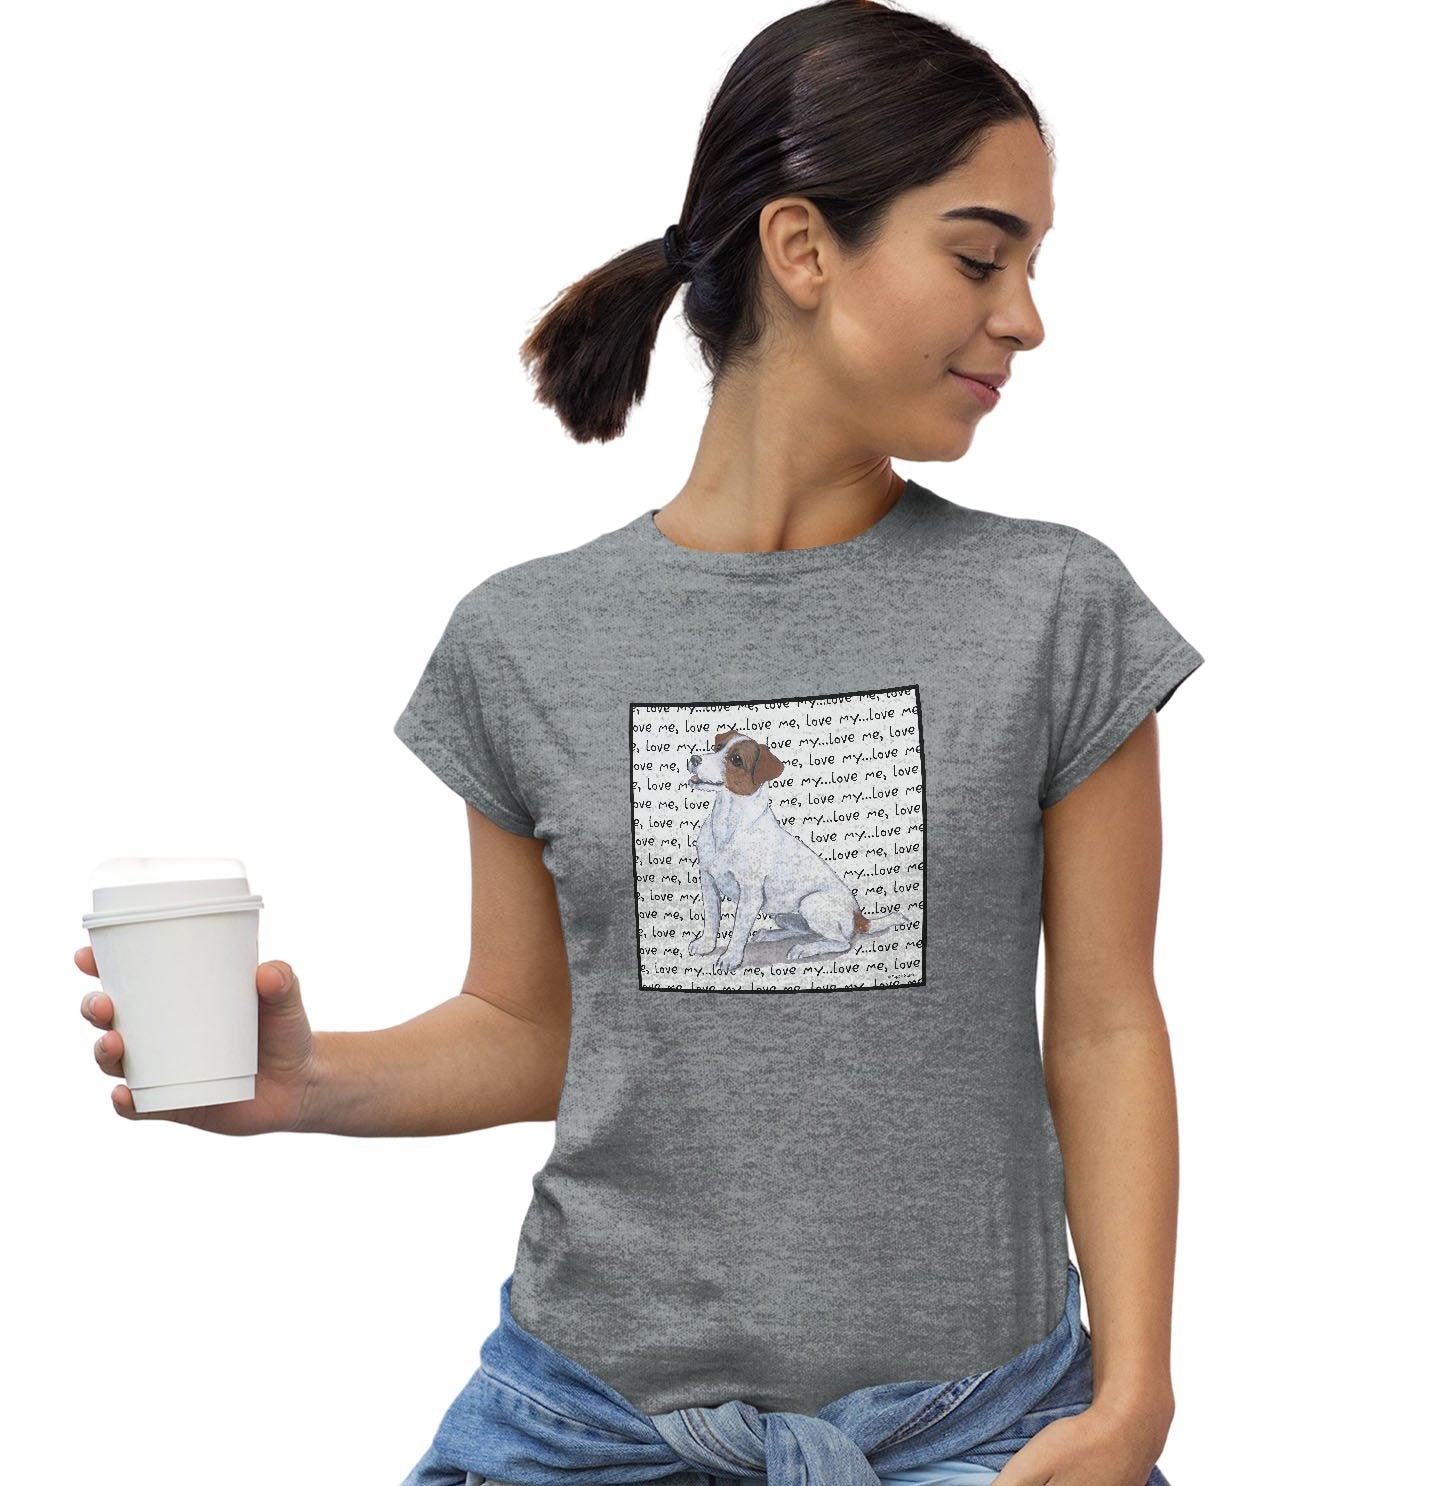 Jack Russell Terrier Love Text - Women's Fitted T-Shirt